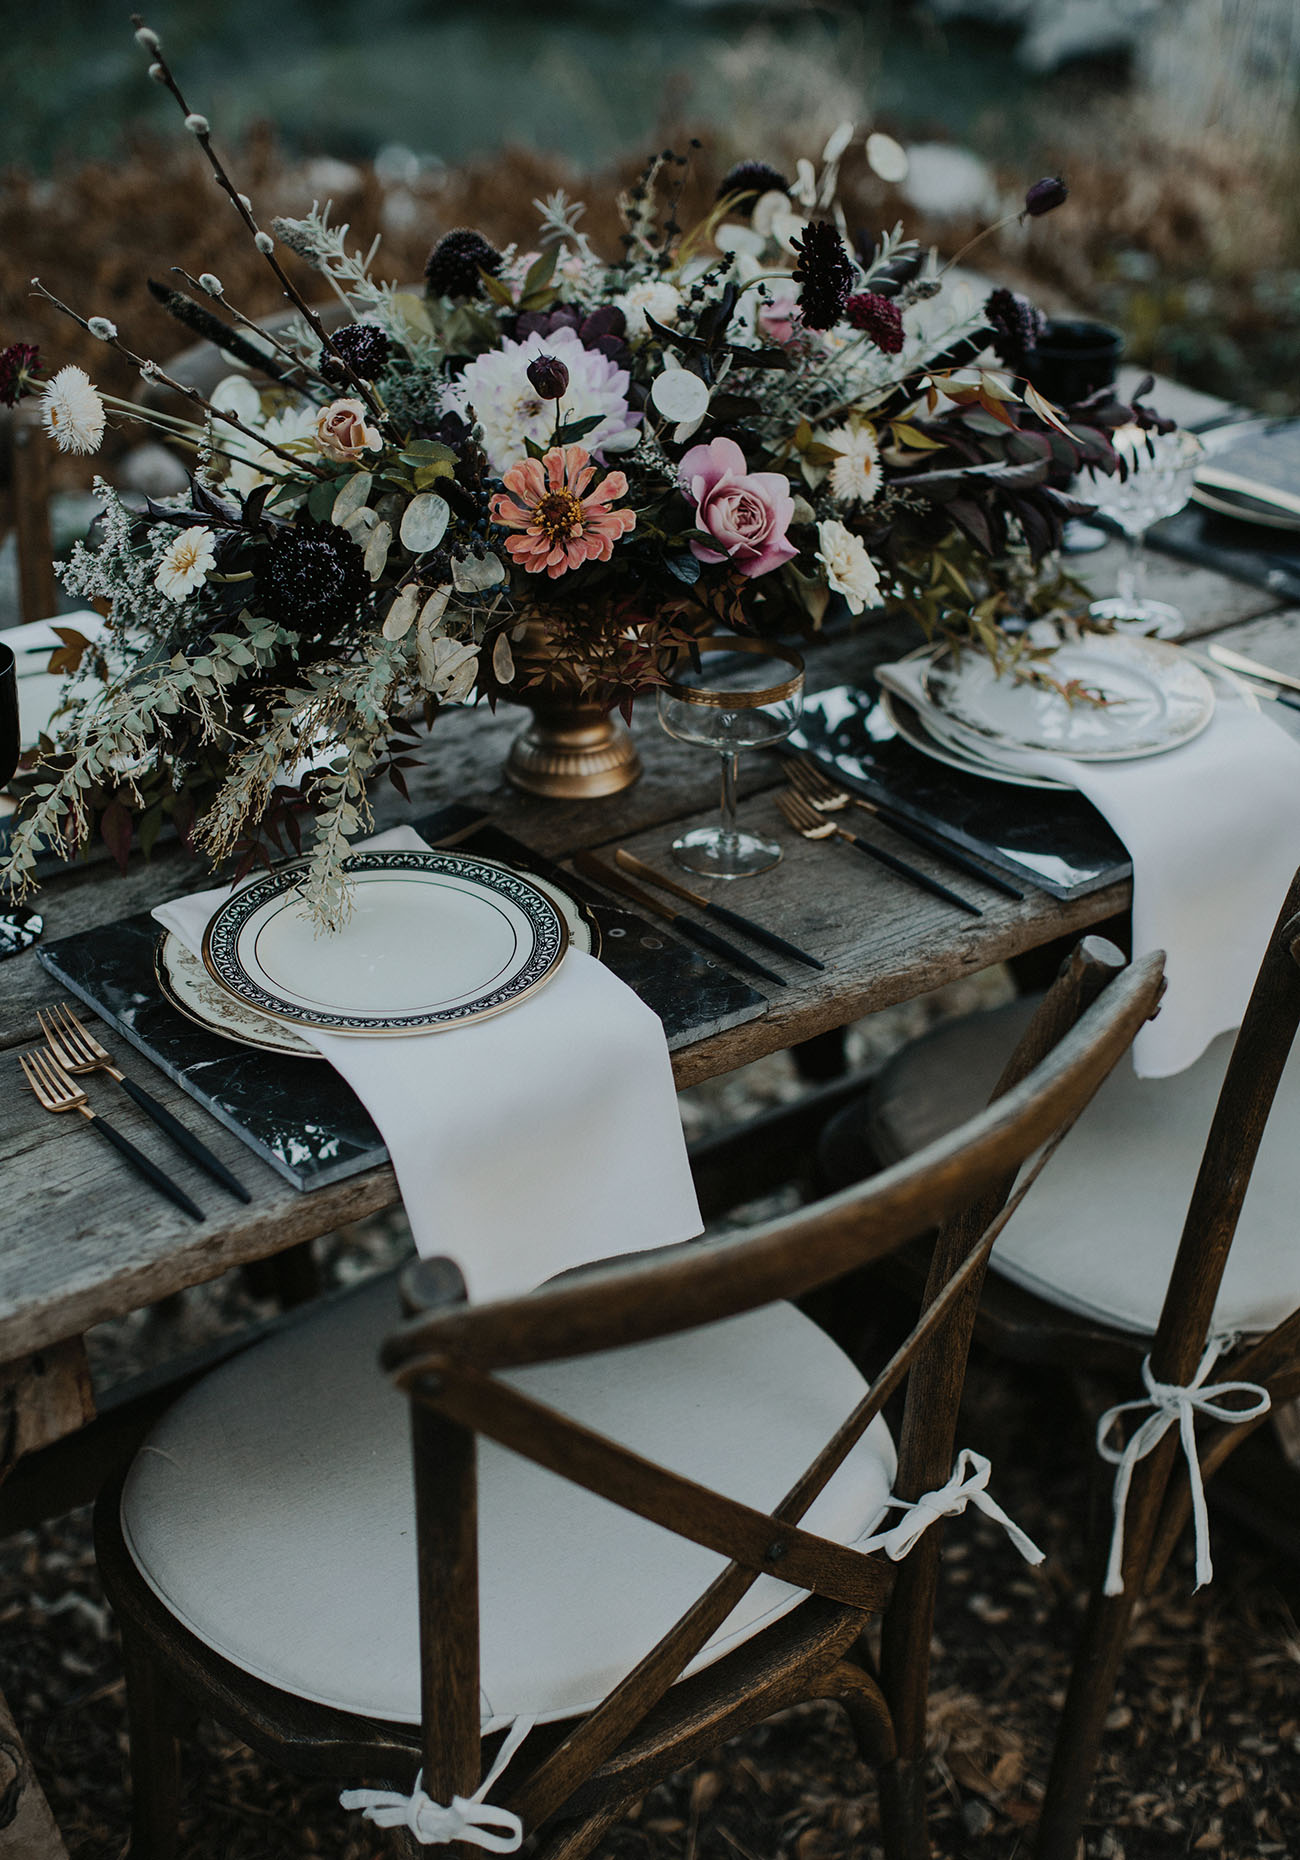 A gorgeous haunted tablescape with a lush textural centerpiece, marble chargers, printed plates, gilded touches and white napkins